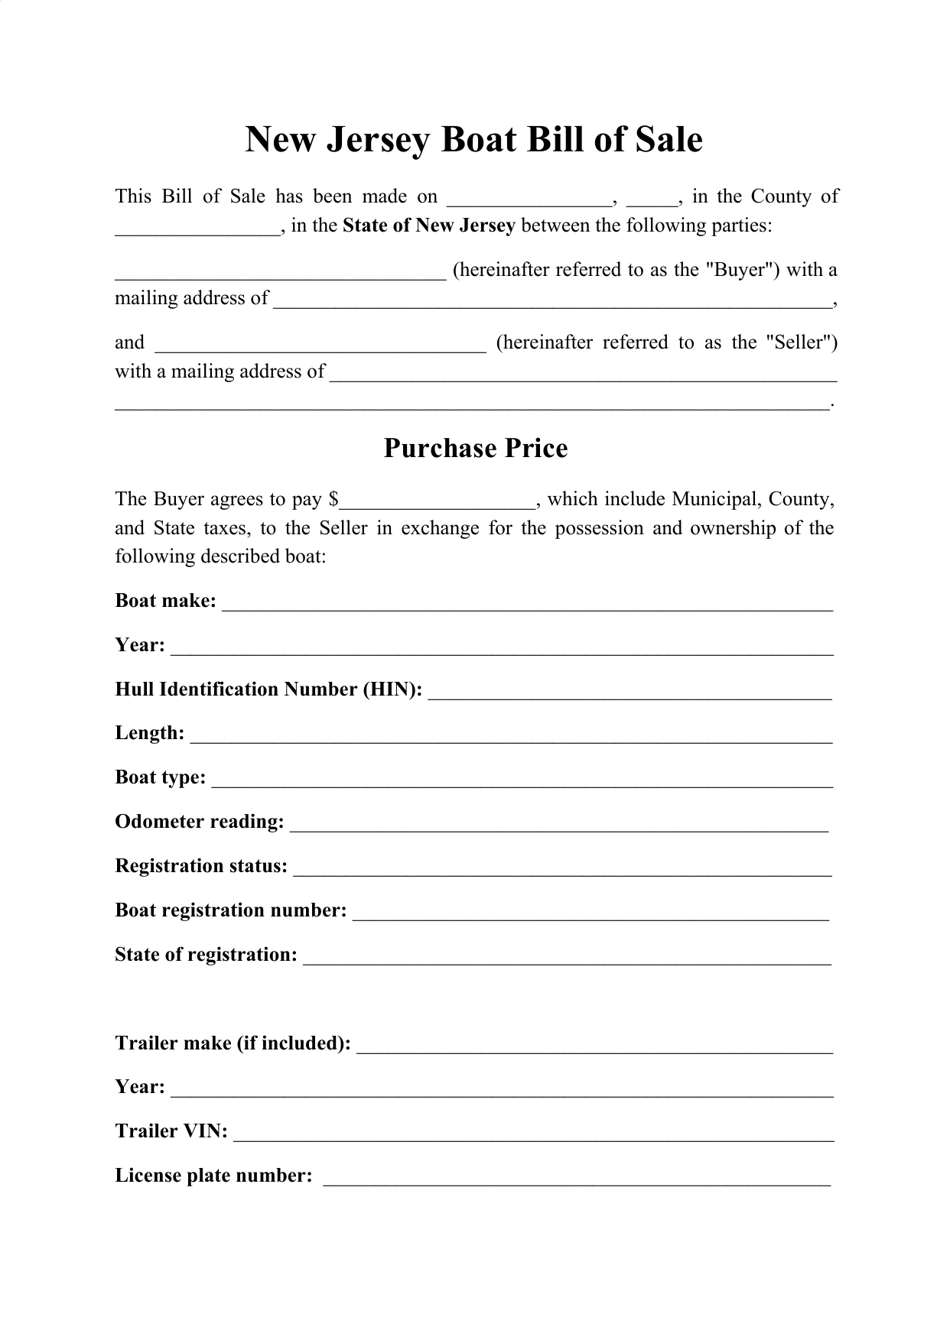 new-jersey-boat-bill-of-sale-form-fill-out-sign-online-and-download